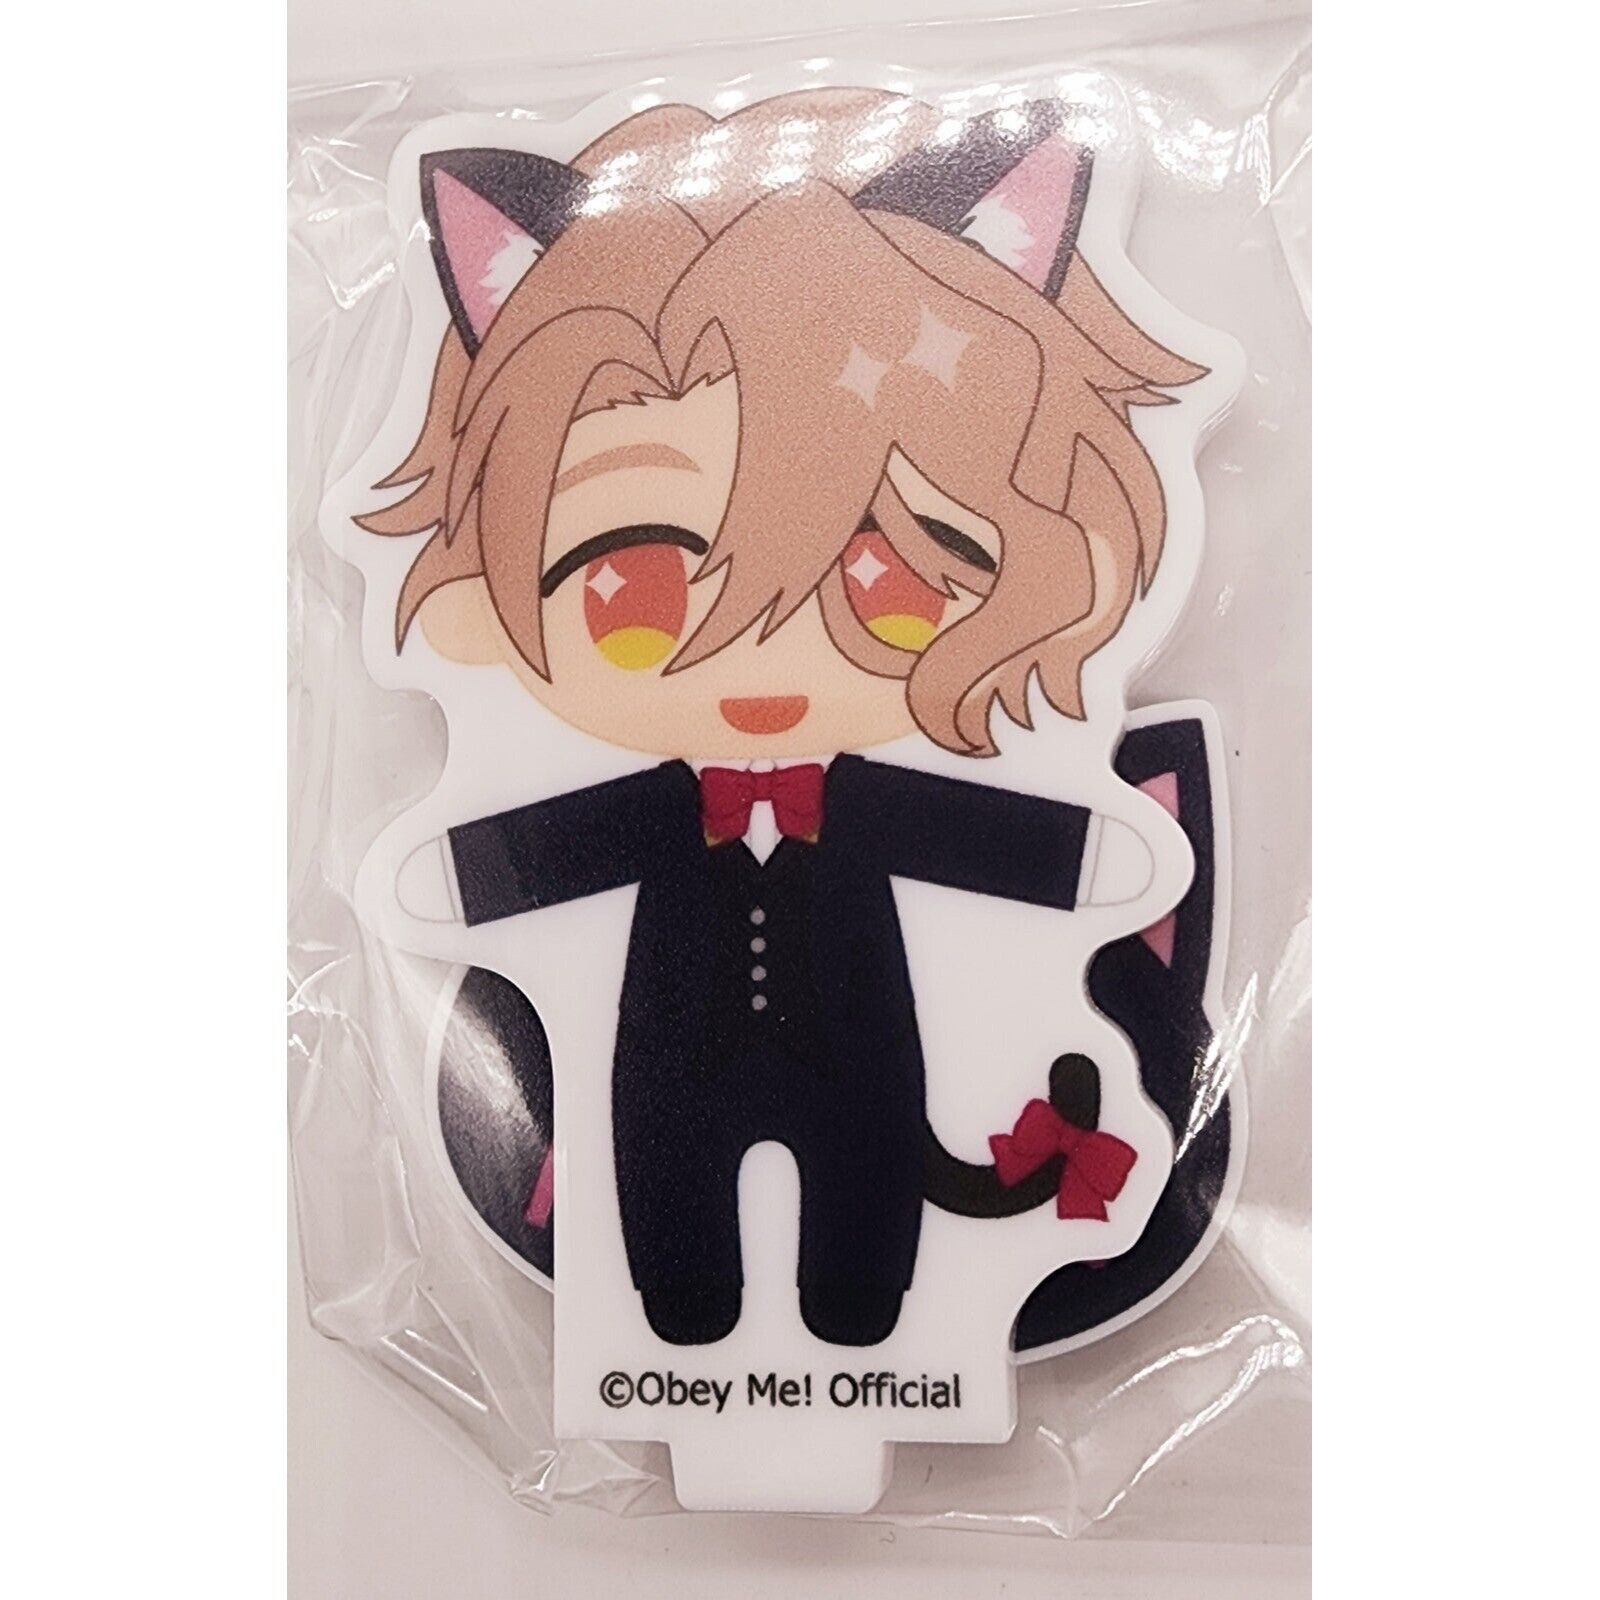 Obey Me Asmodeus Asmo Black Cat Butler Cafe Reversible Acrylic Stand *US SELLER